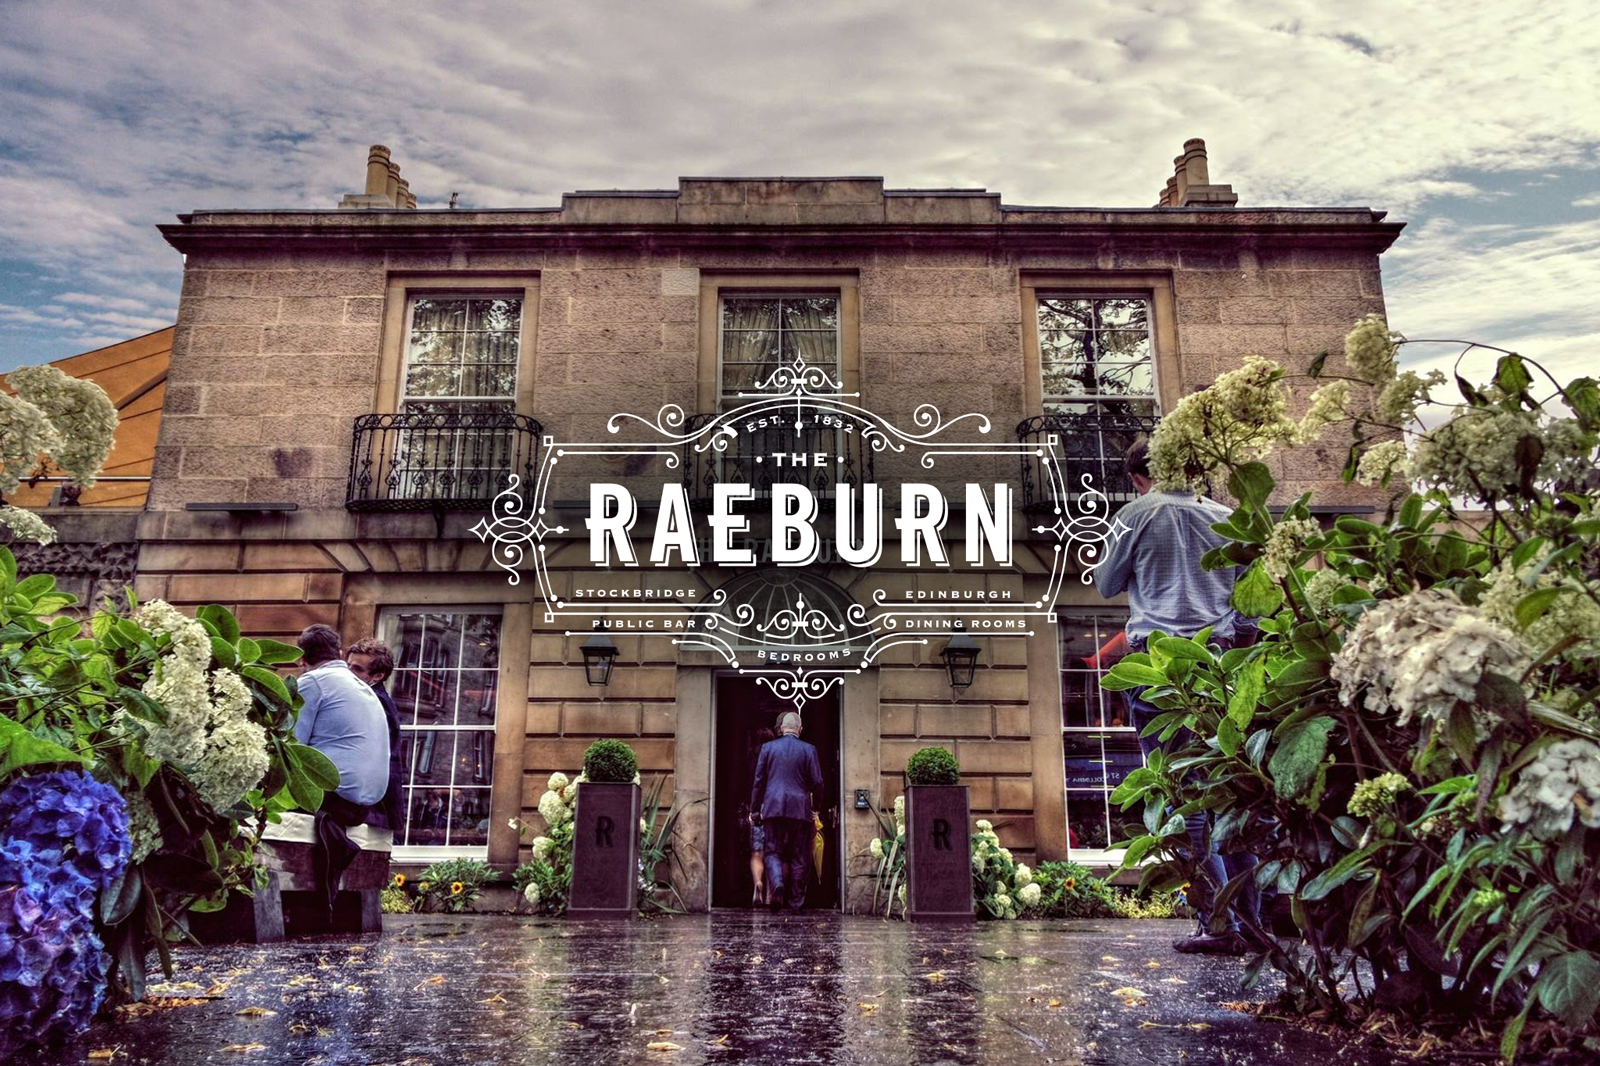 A picturesque wedding venue raeburn surrounded by lush greenery.